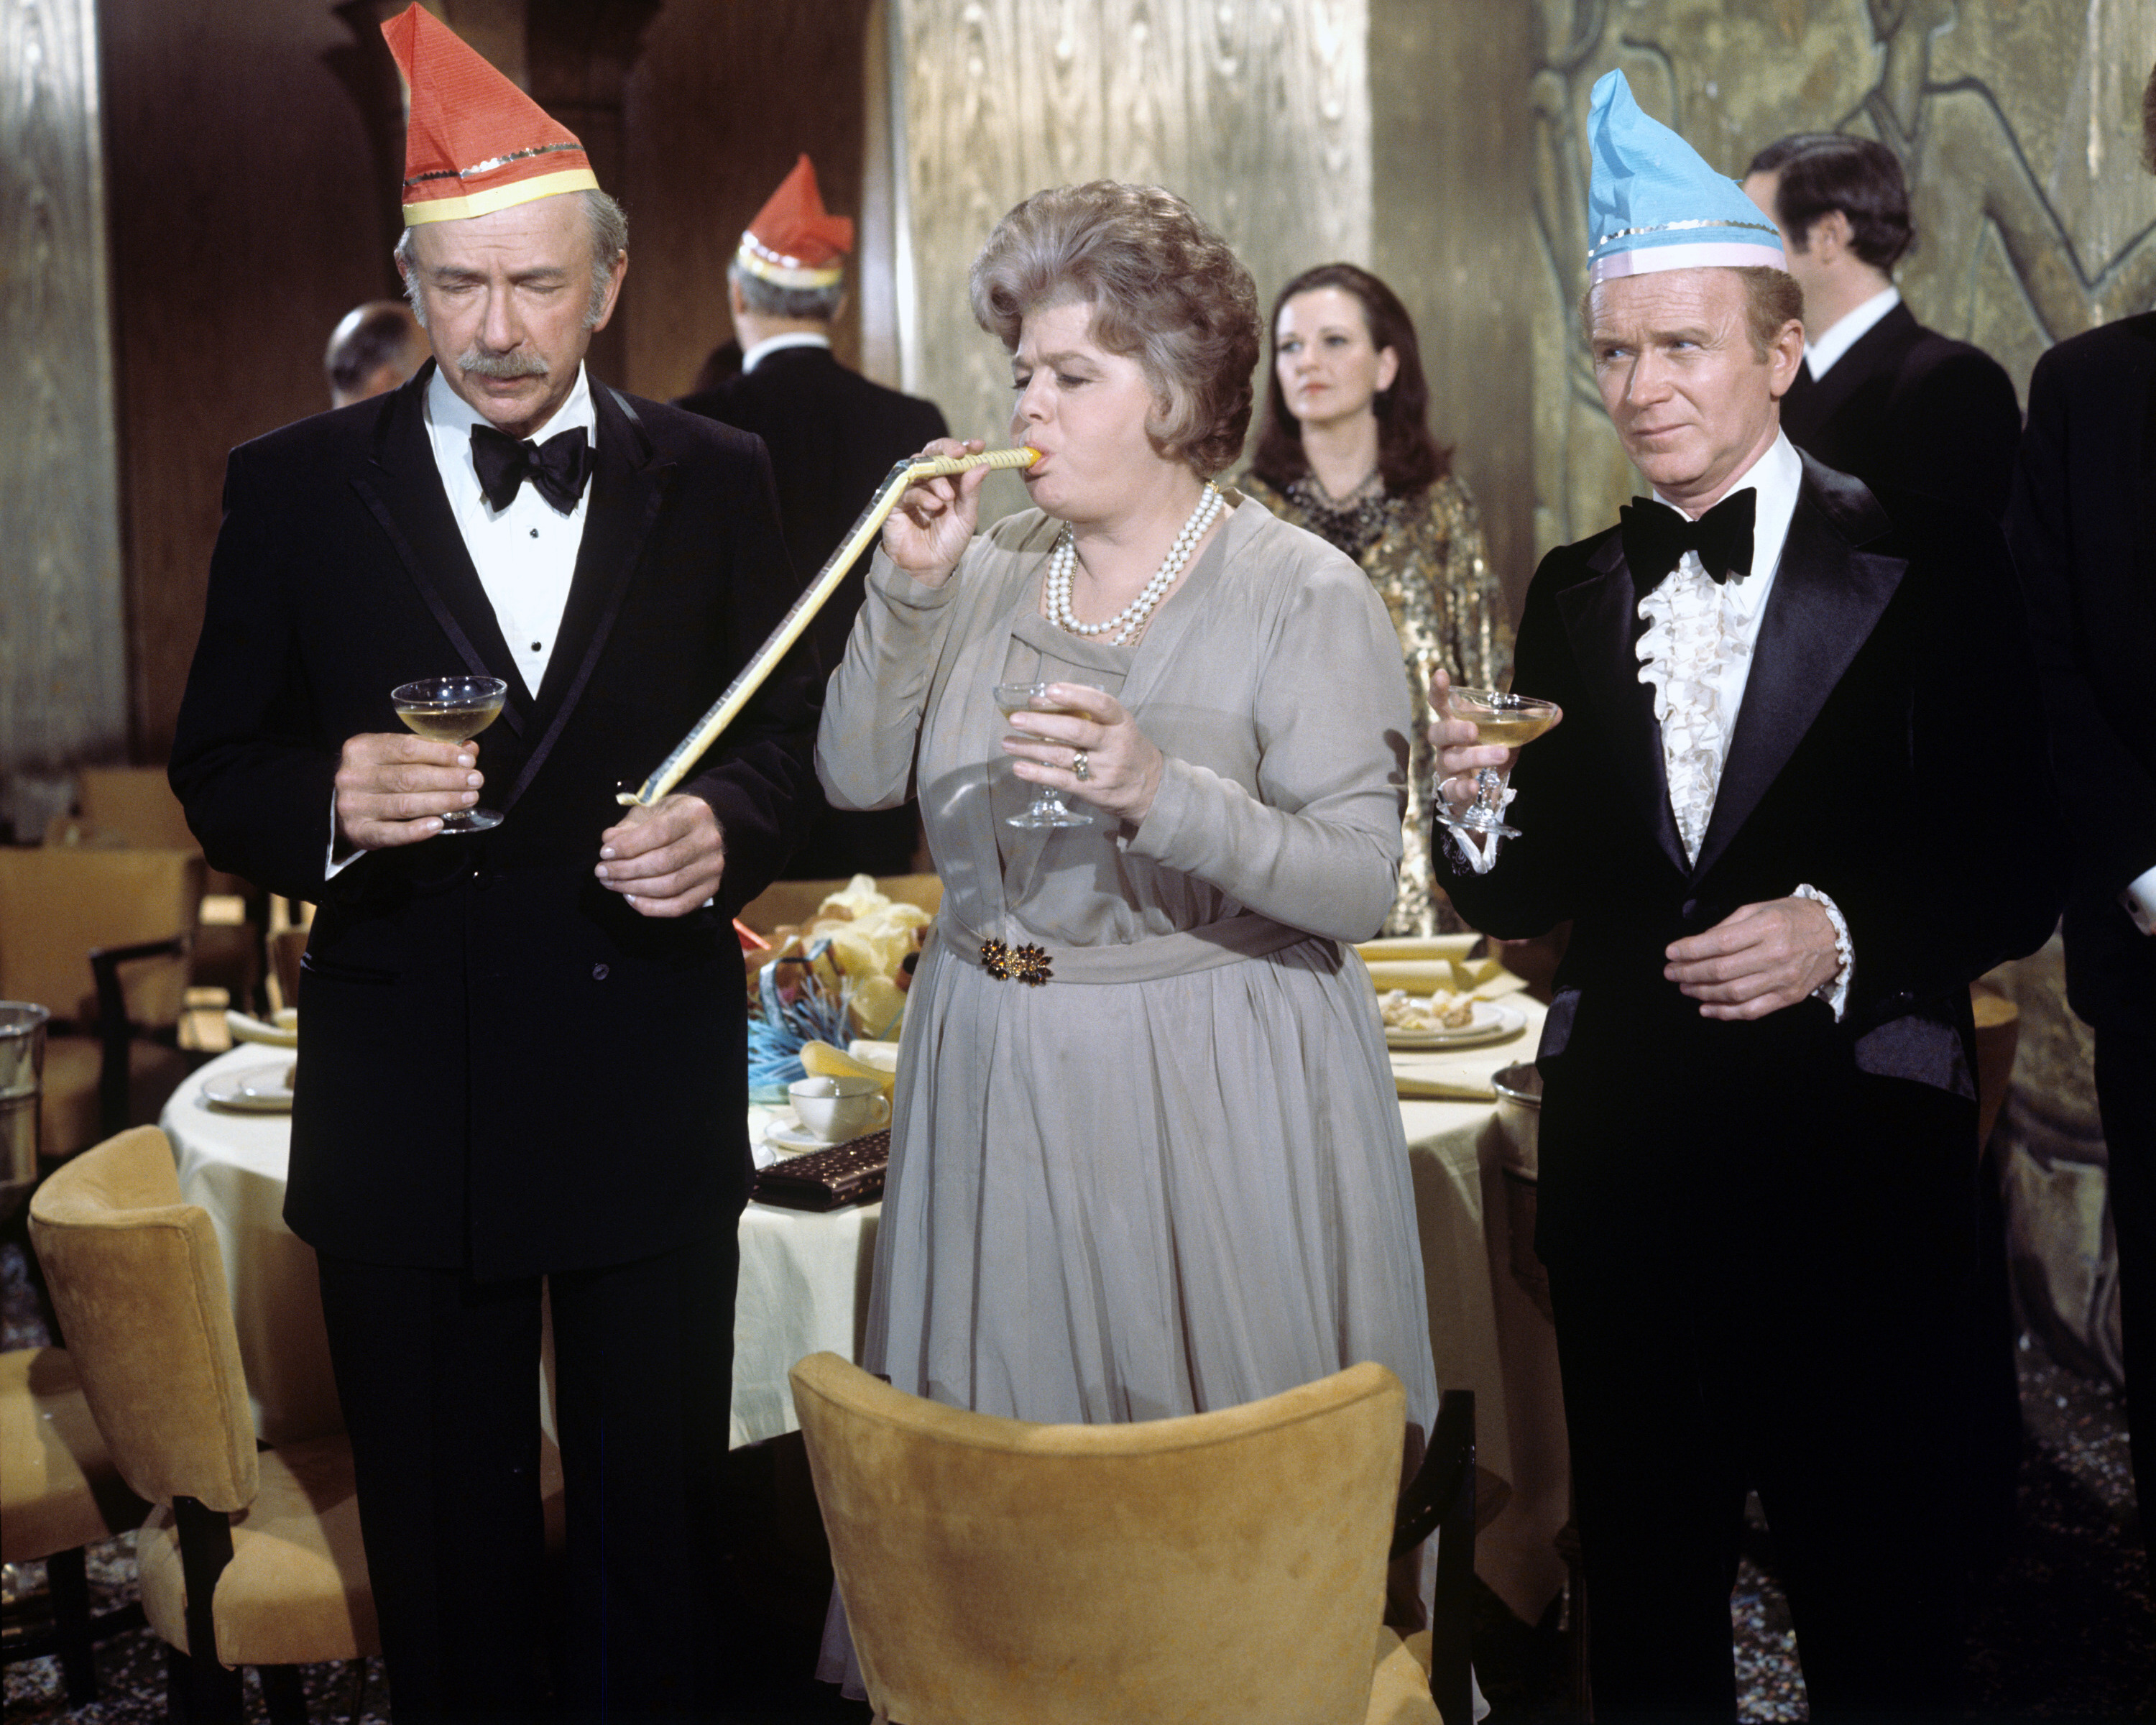 This rogue wave has not yet struck "The Poseidon adventure." From left to right: Jack Albertson, Shelley Winters and Red Buttons. 